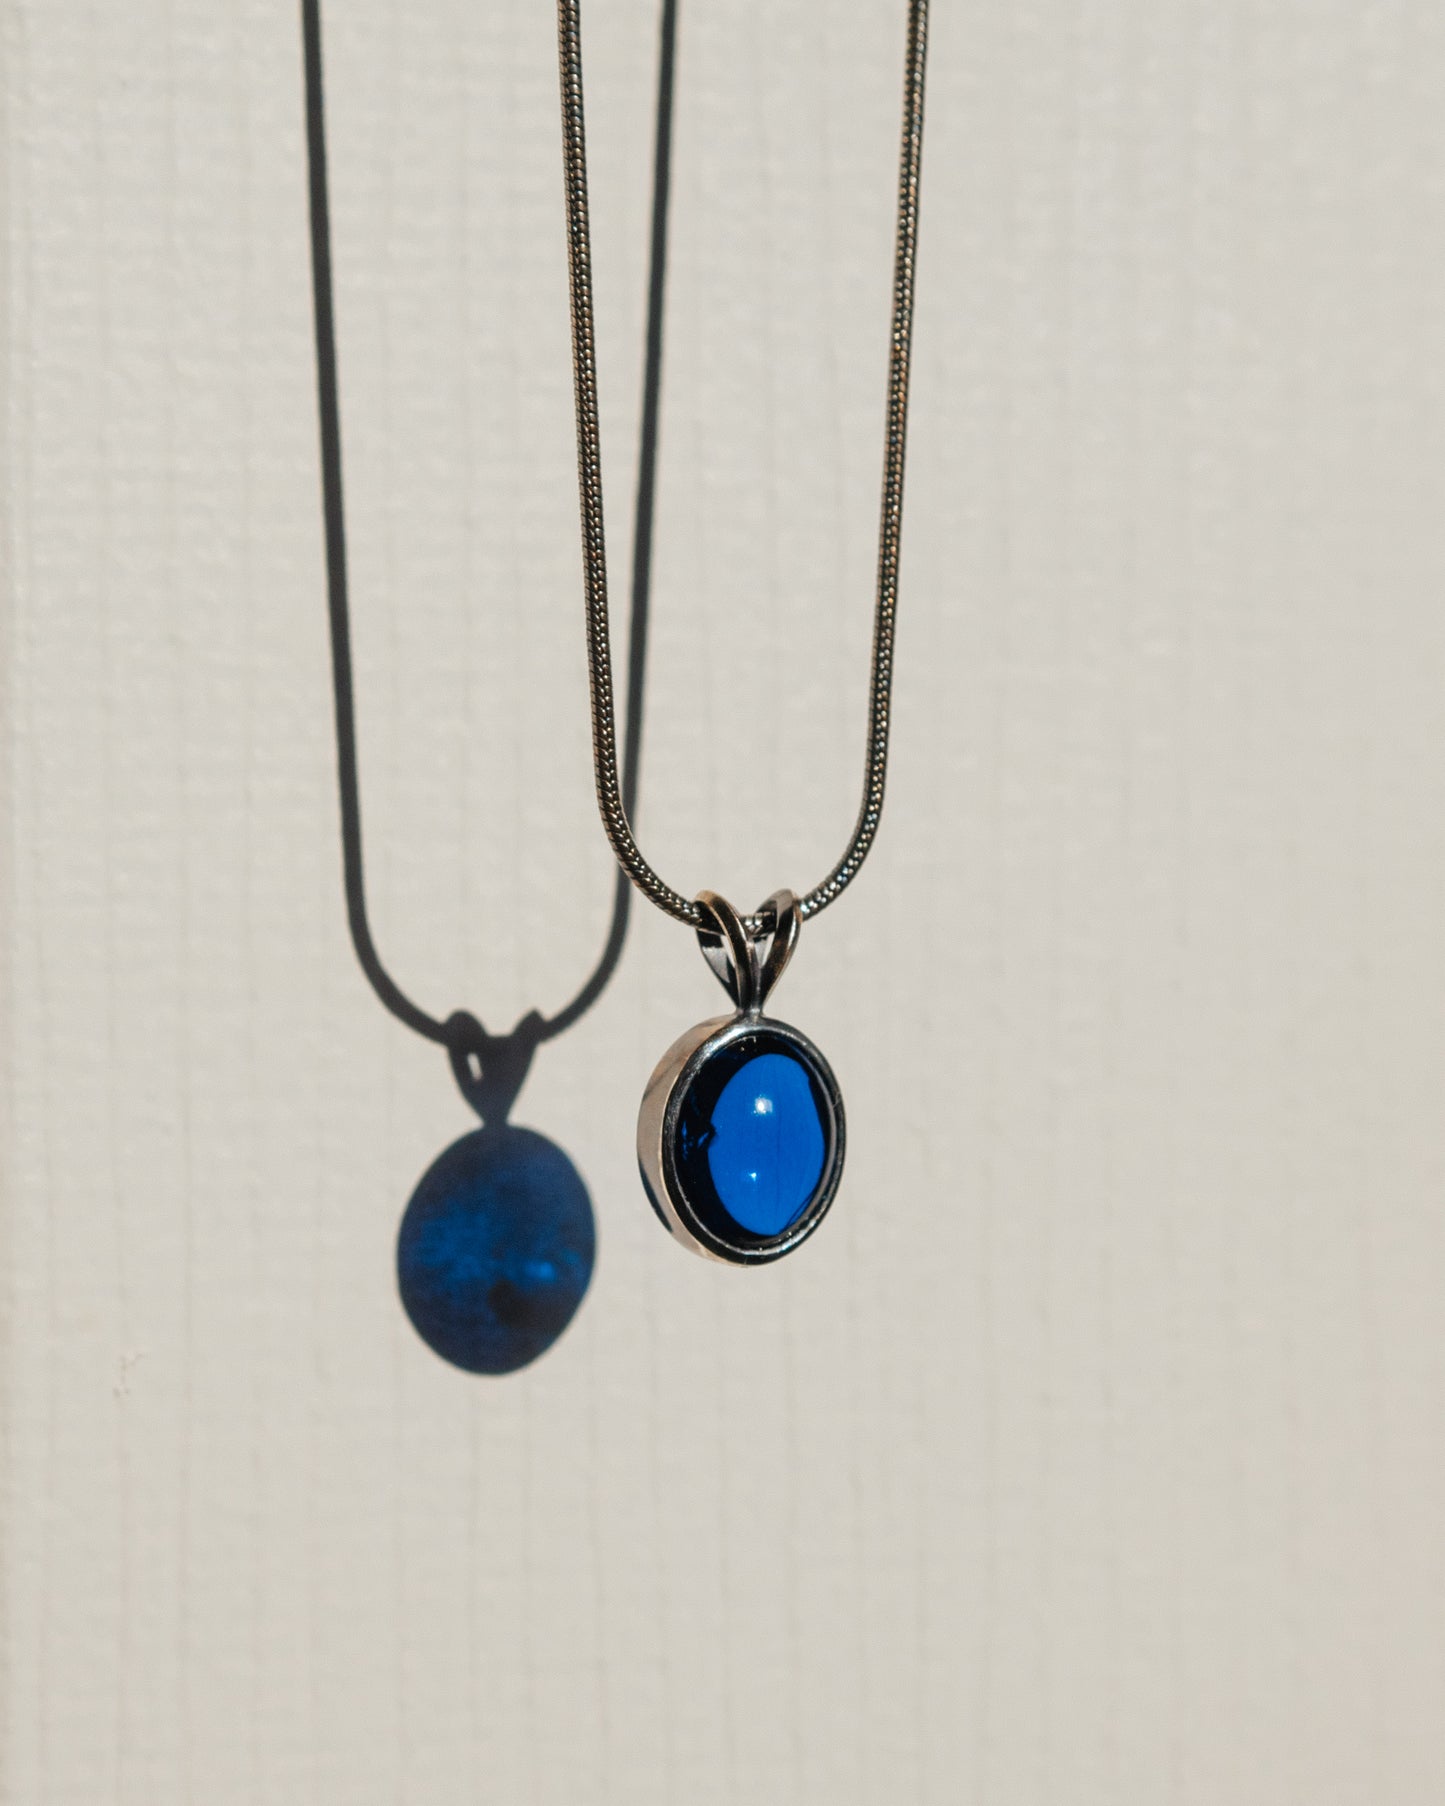 Blue Moon Necklace - One of a Kind